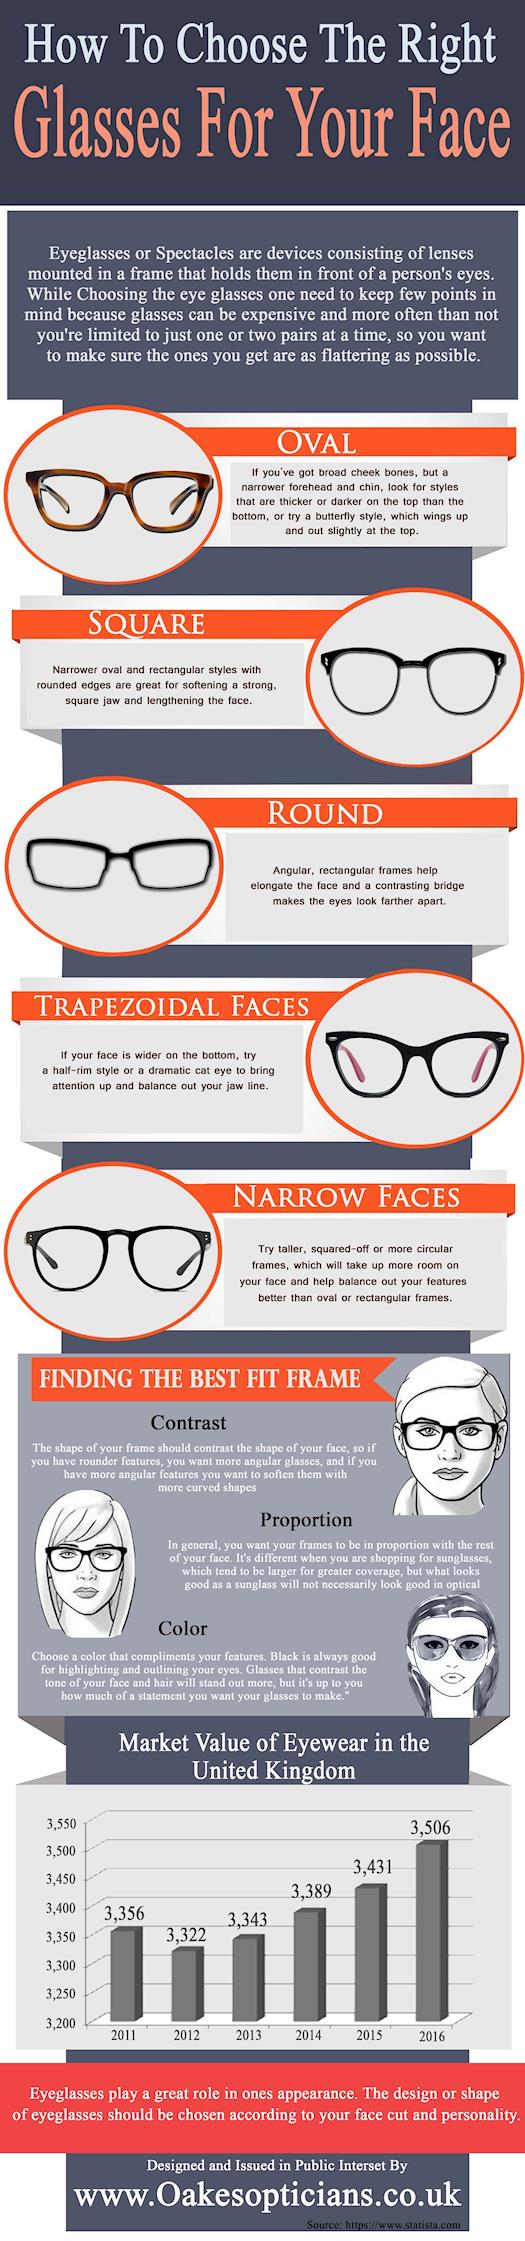 How To Choose The Right Glasses For Your Face-Recovered